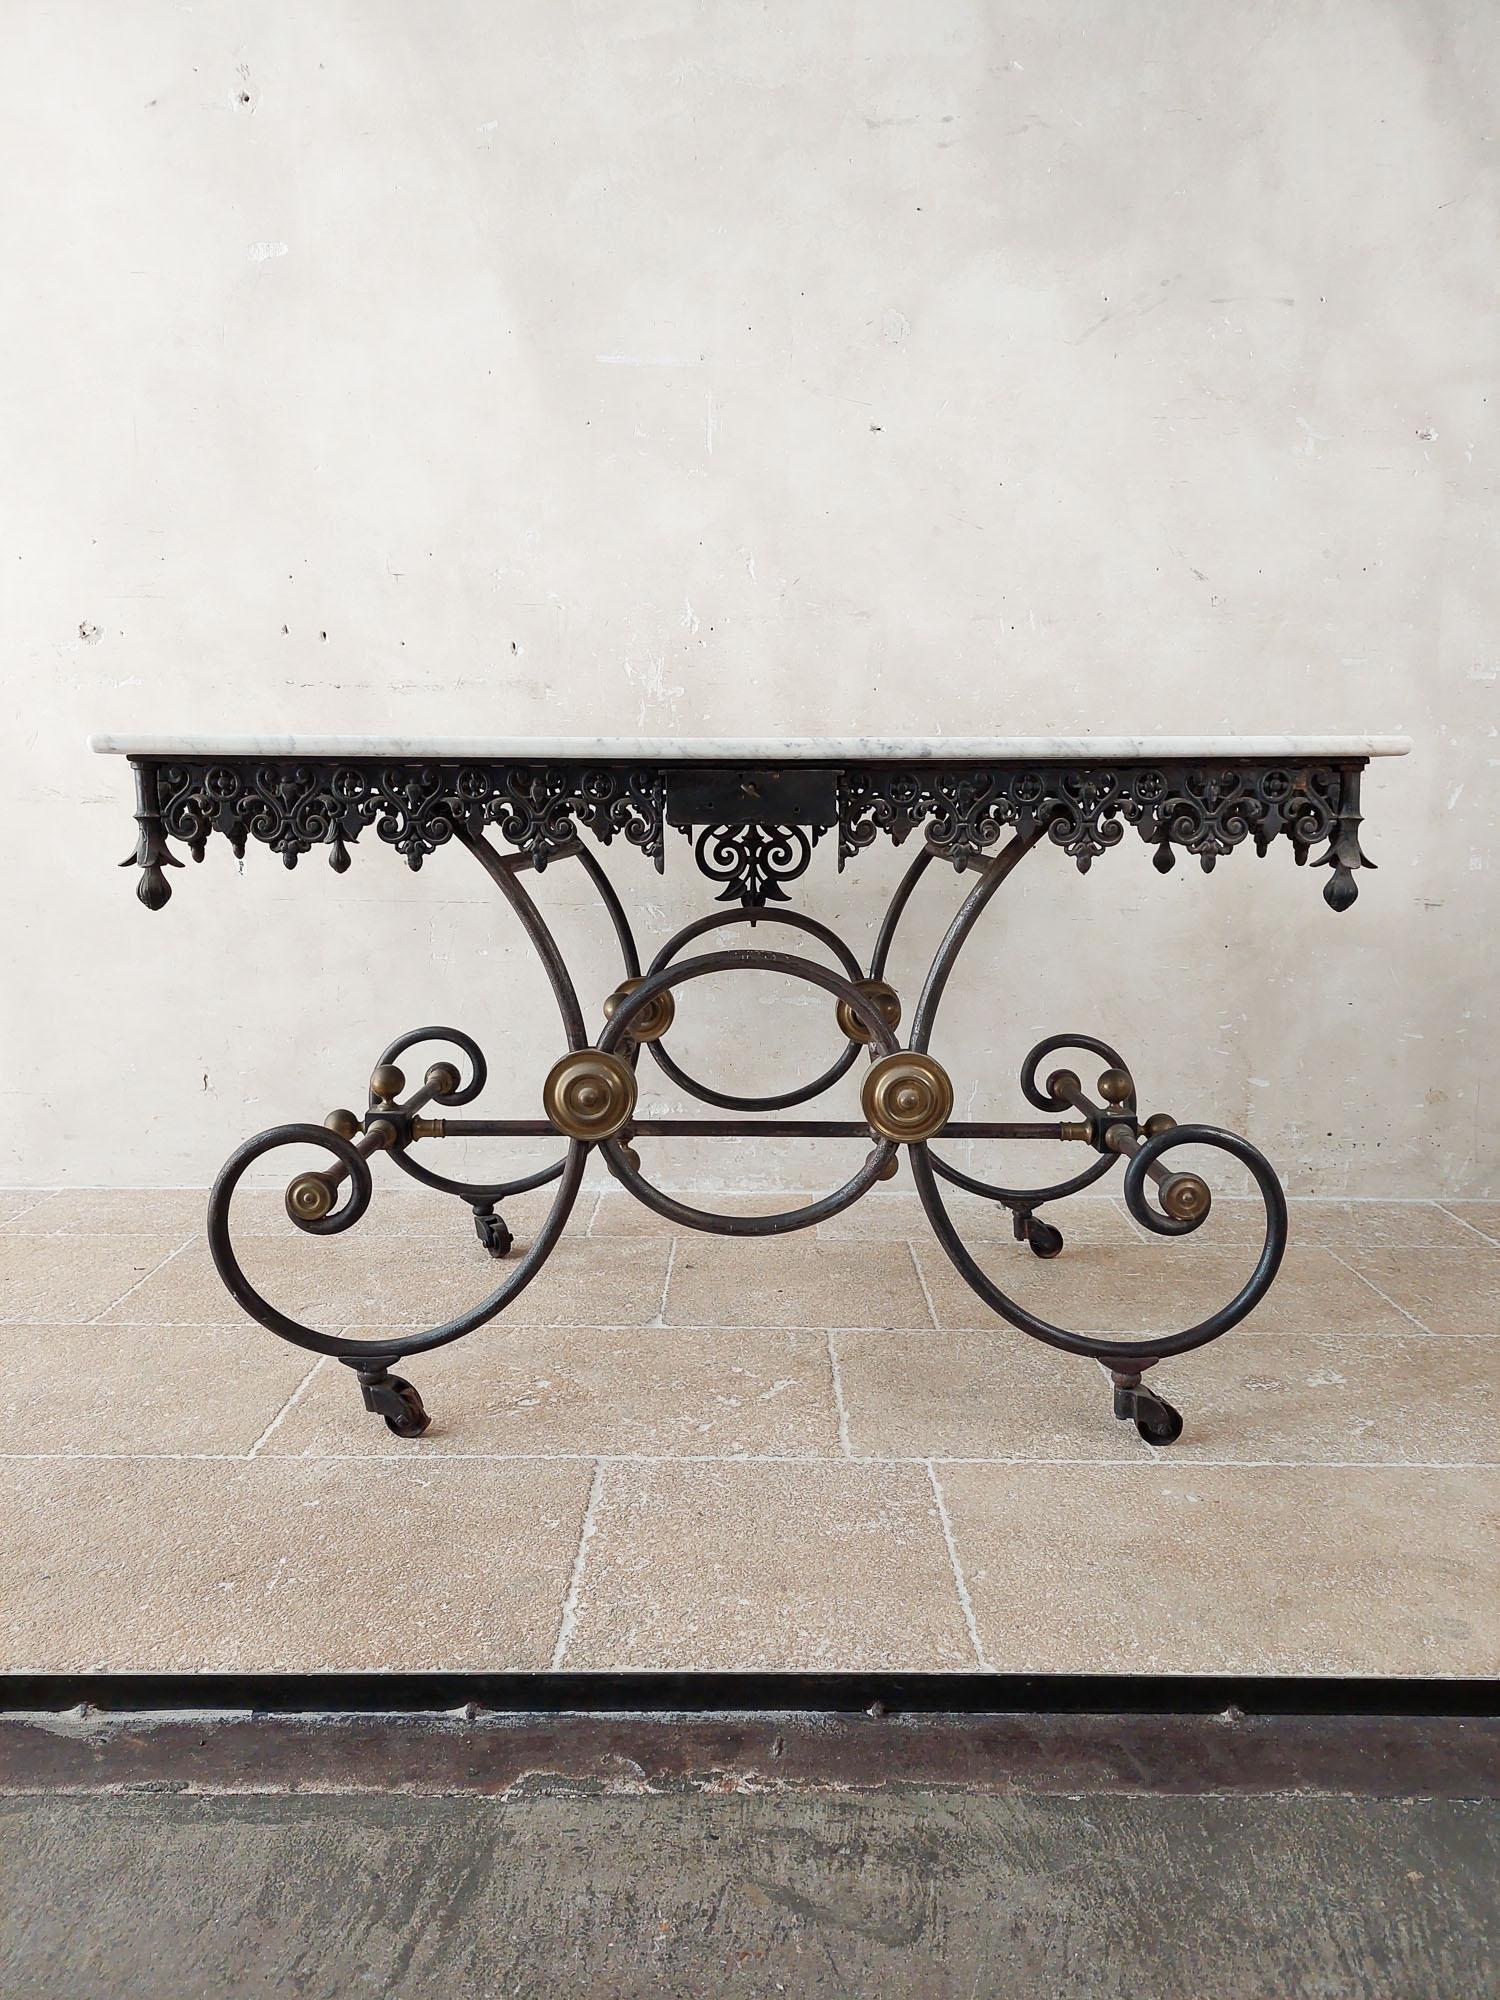 Antique luxury butcher’s table with Carrara marble top from the early 1900s. The base of this butcher’s display table is made of wrought iron and cast iron in a beautiful curl with a beautiful edge and drawer. The table has bronze details as a